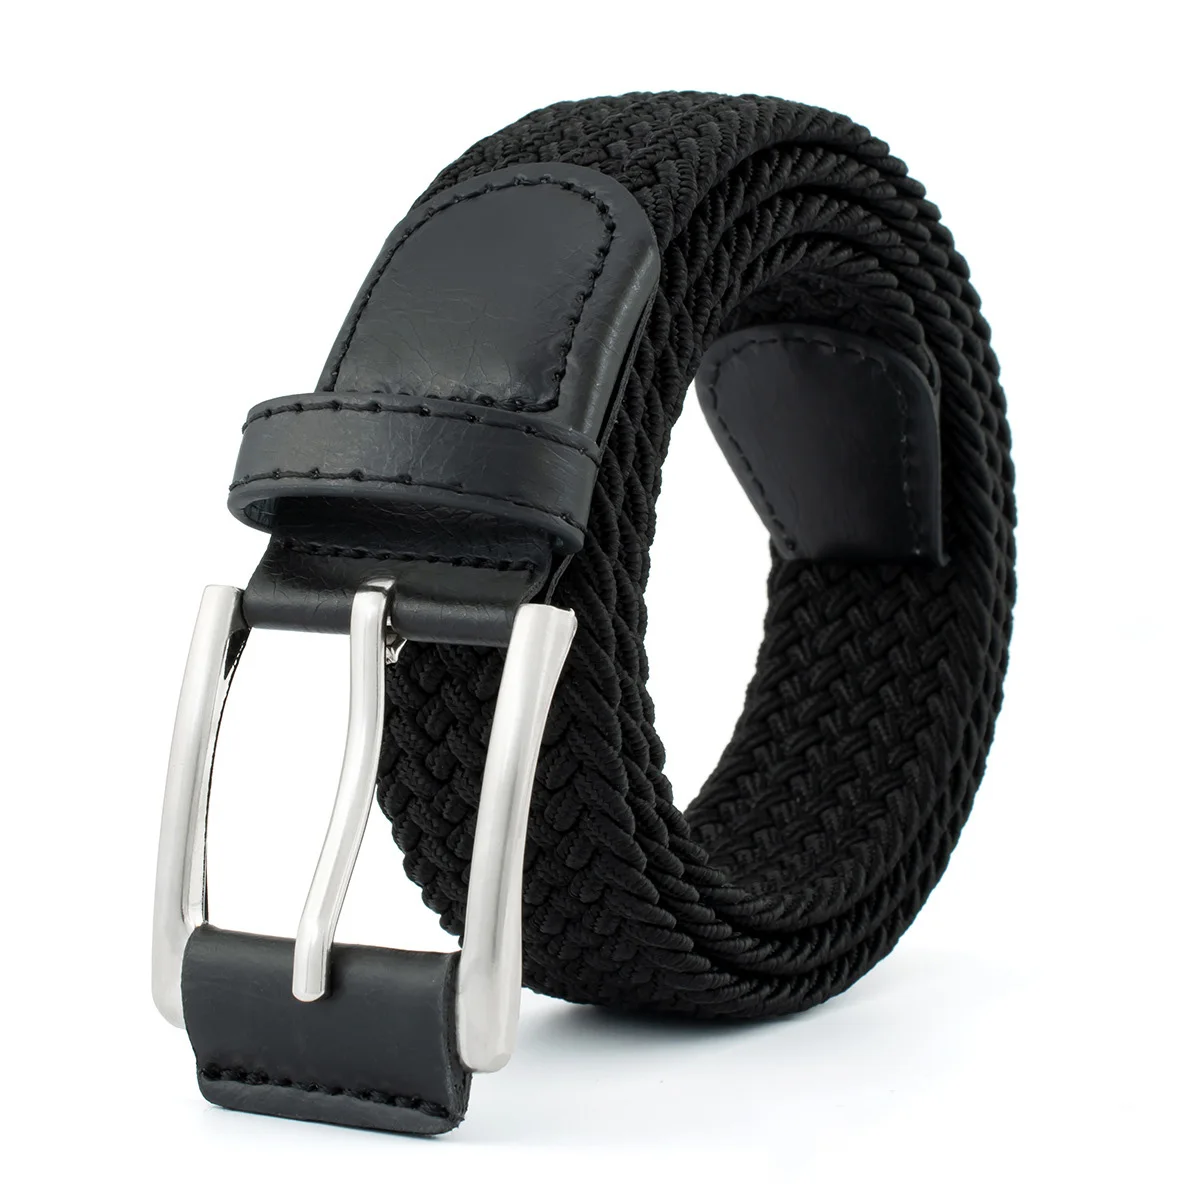 High Quality Leisure Breathable Outdoor Nylon Canvas Belt Zinc Alloy Buckle Head Fashion Youth Travel Belt Woven Ribbon A3418